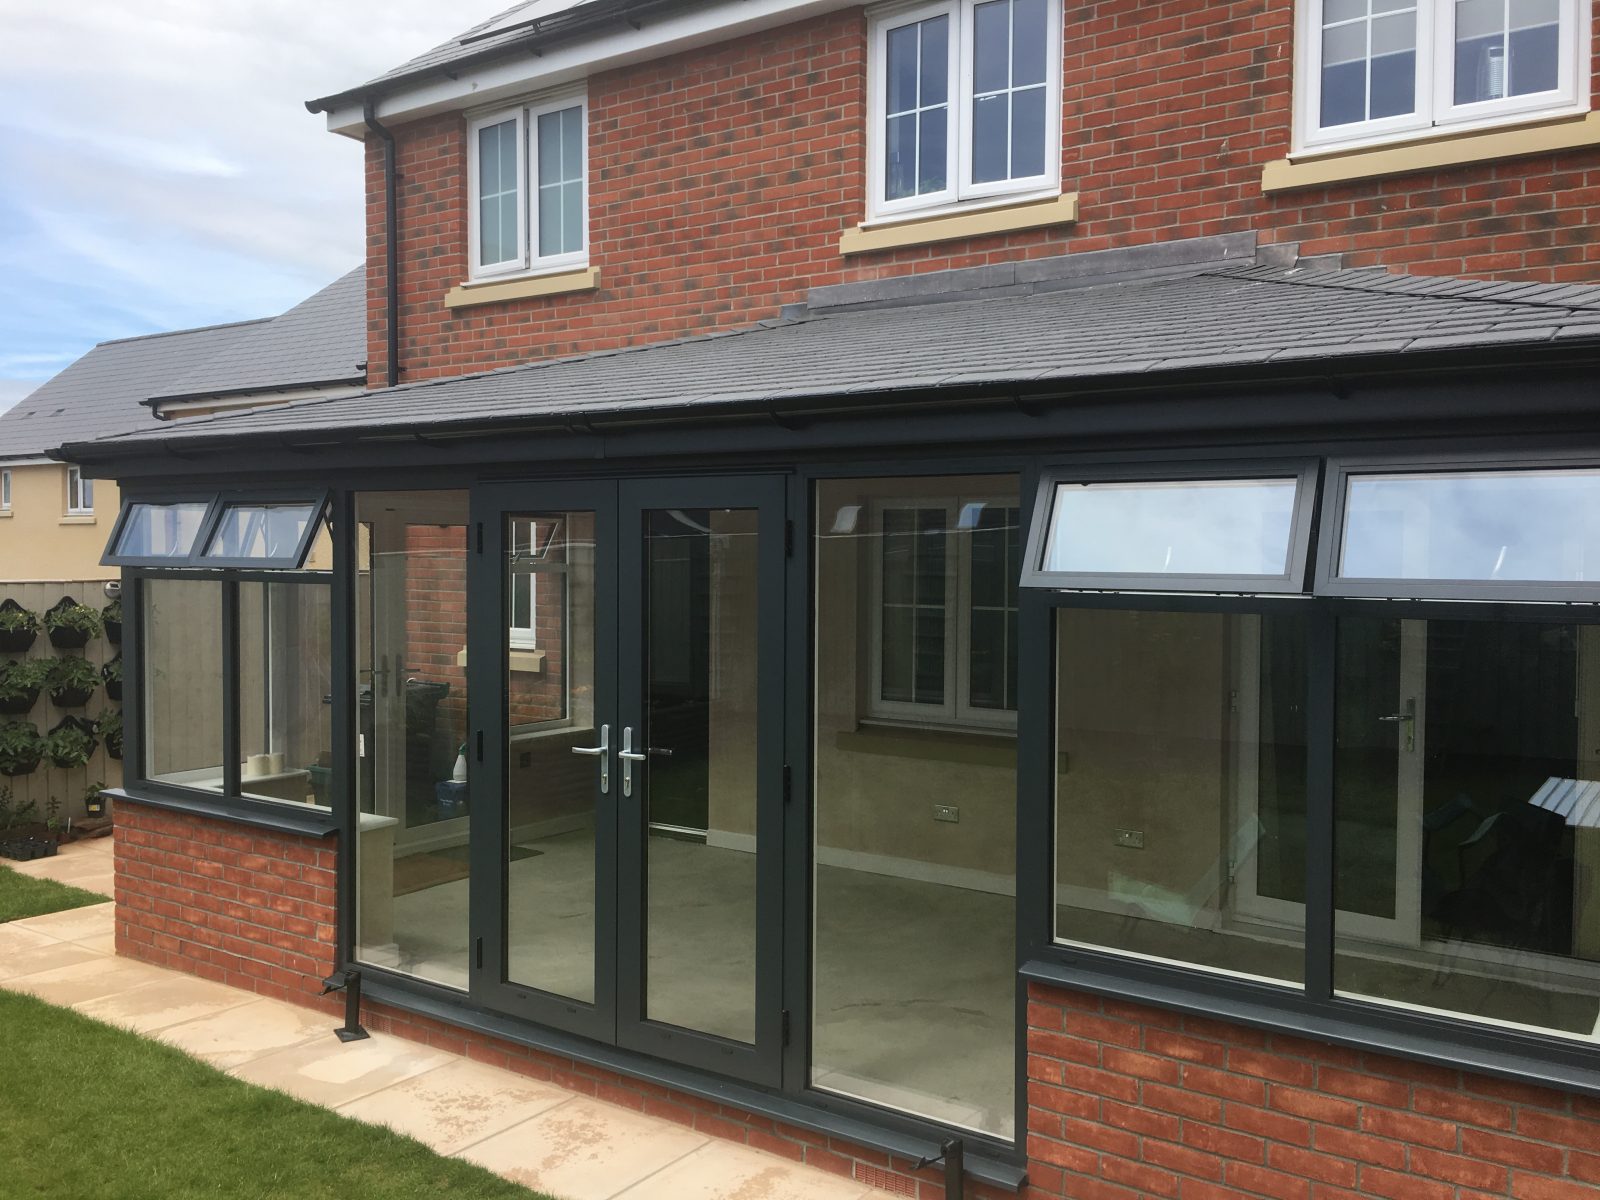 How can I make my conservatory more energy efficient?